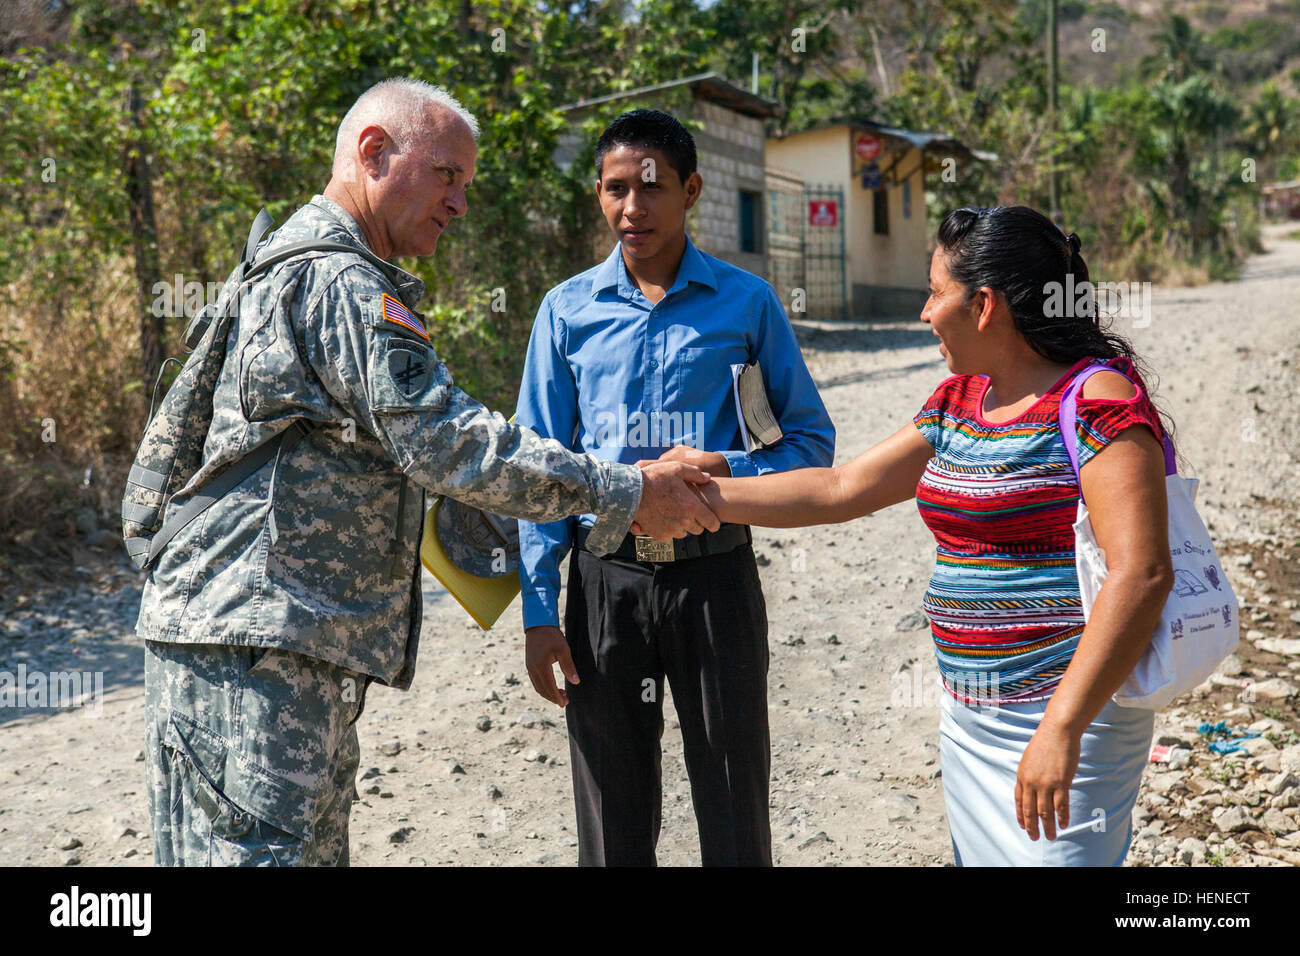 U.S. Army Master Sgt. John Barneson discusses an upcoming Medical Readiness Training Exercise with local villagers during Beyond the Horizon 2014, Zacapa, Guatemala, Apr. 12, 2014. Beyond the Horizon is an annual exercise that embraces the partnership between the United States and Guatemala, to provide focused humanitarian assistance through various medical, dental, and civic action programs. (U.S. Army photo by Staff Staff Sgt. Justin P. Morelli / Released) Beyond The Horizon 2014, Guatemala 140412-A-PP104-033 Stock Photo